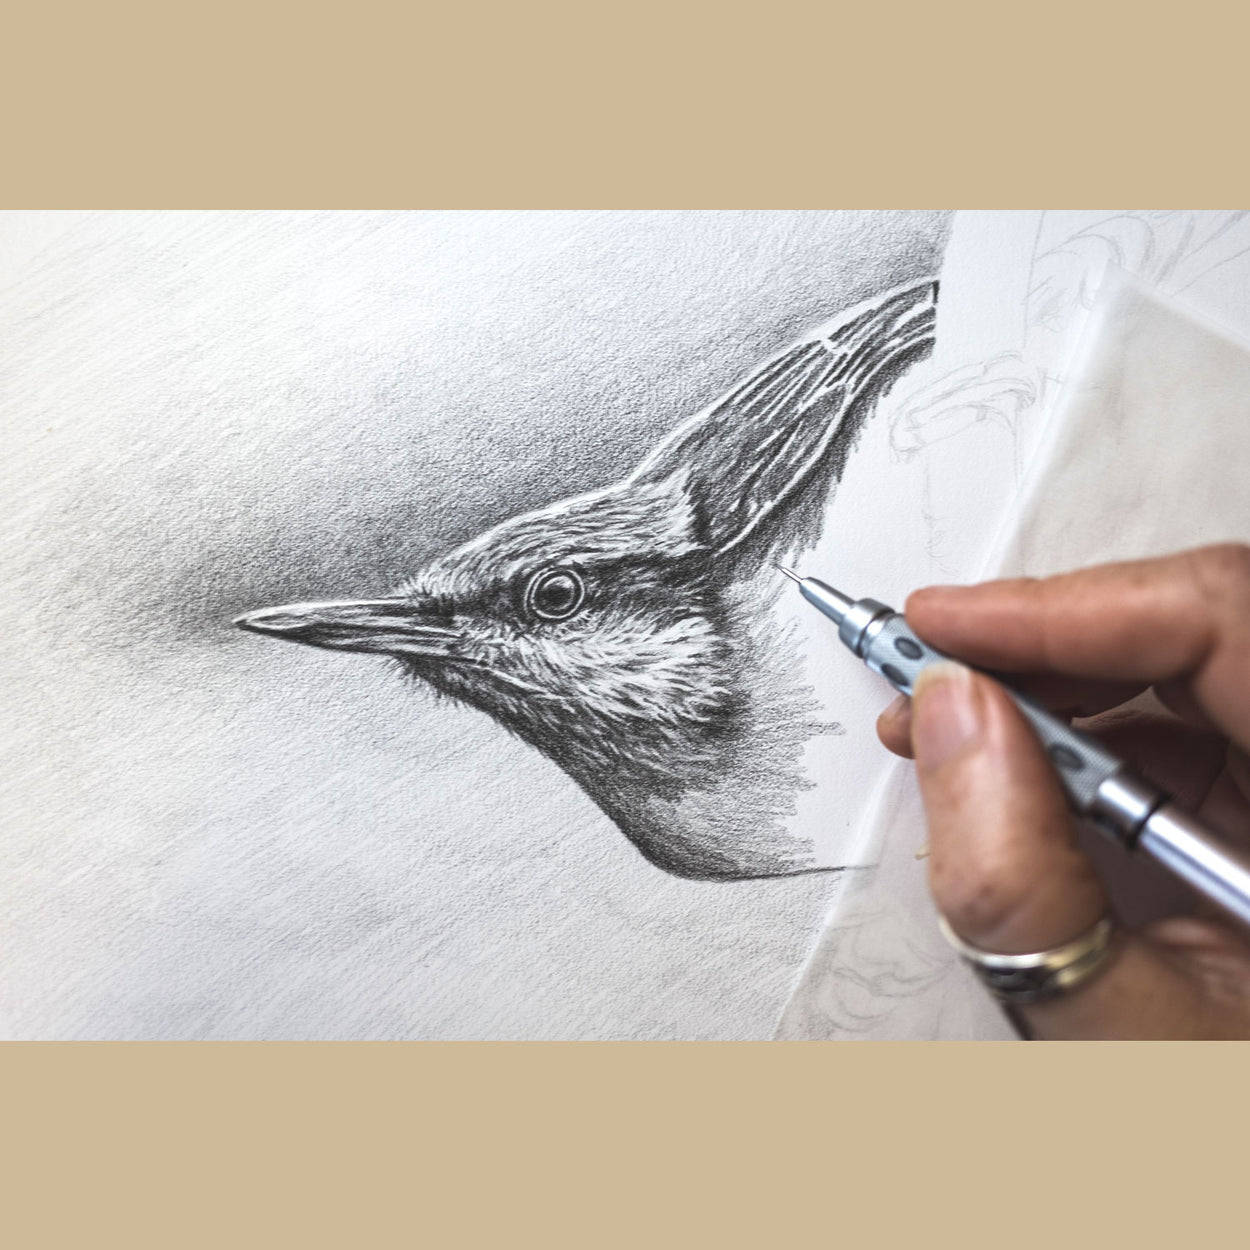 Nuthatch progress photo pencil drawing - The Thriving Wild